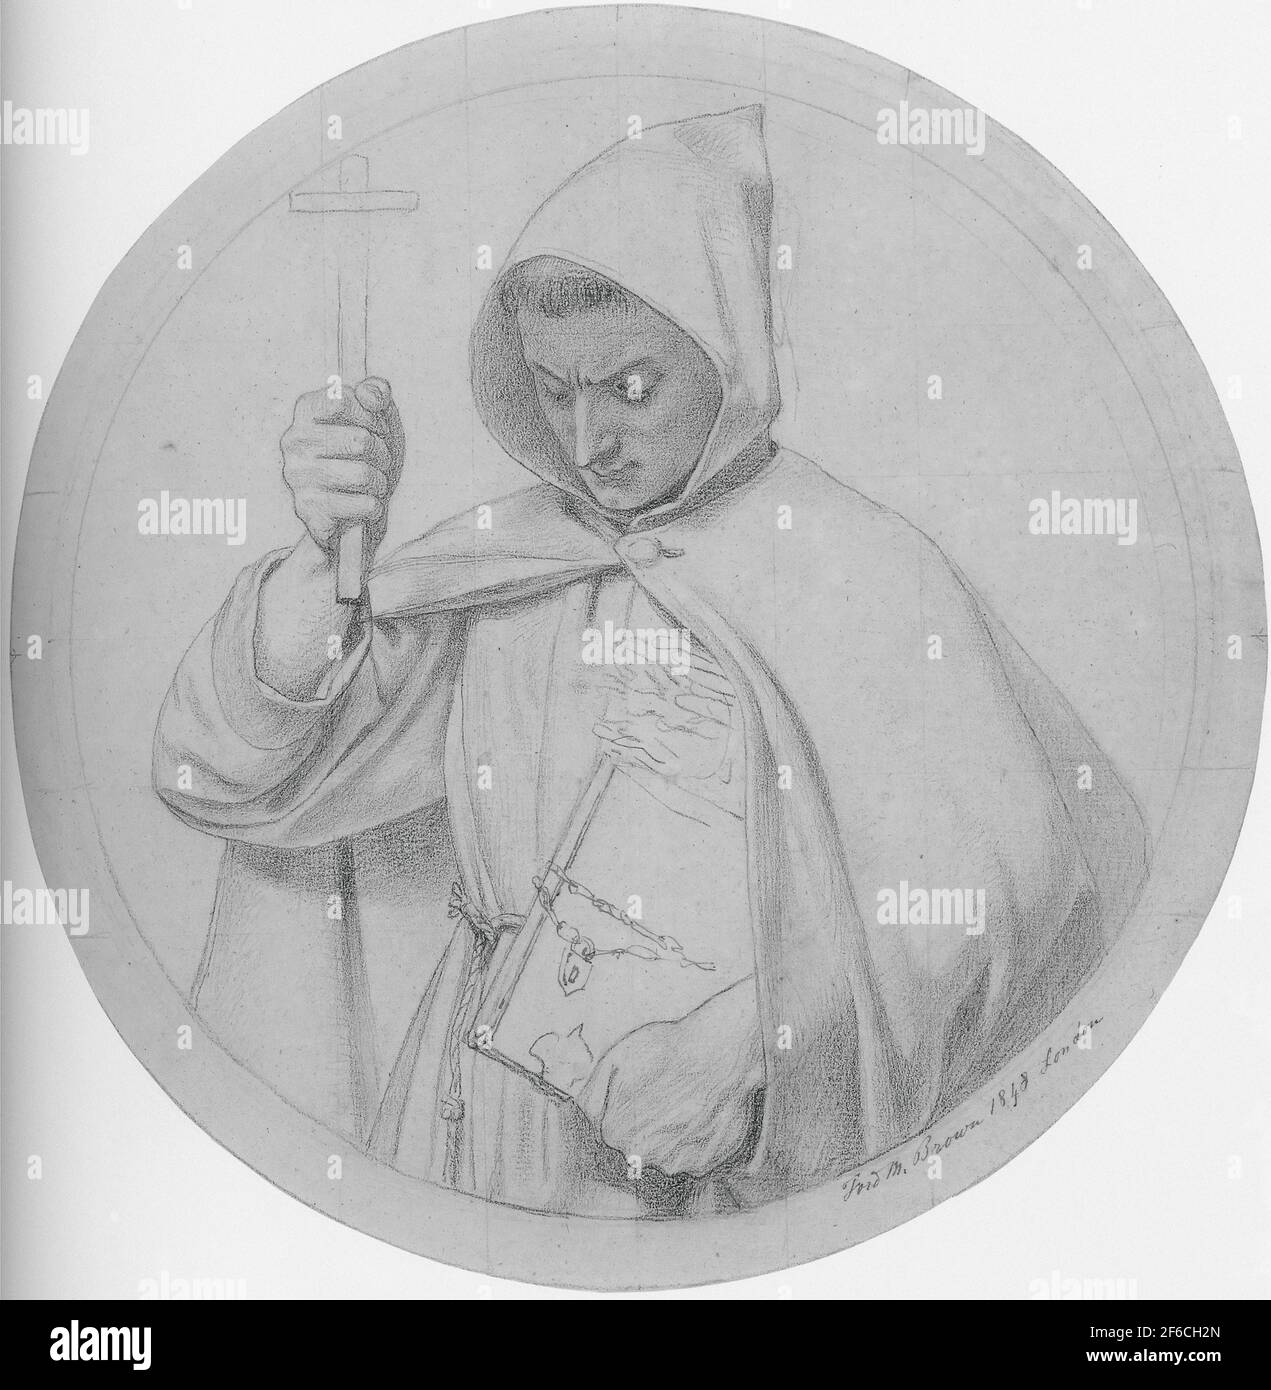 Ford Madox Brown - Study Monk Representing Catholic Faith 1848 Stock Photo